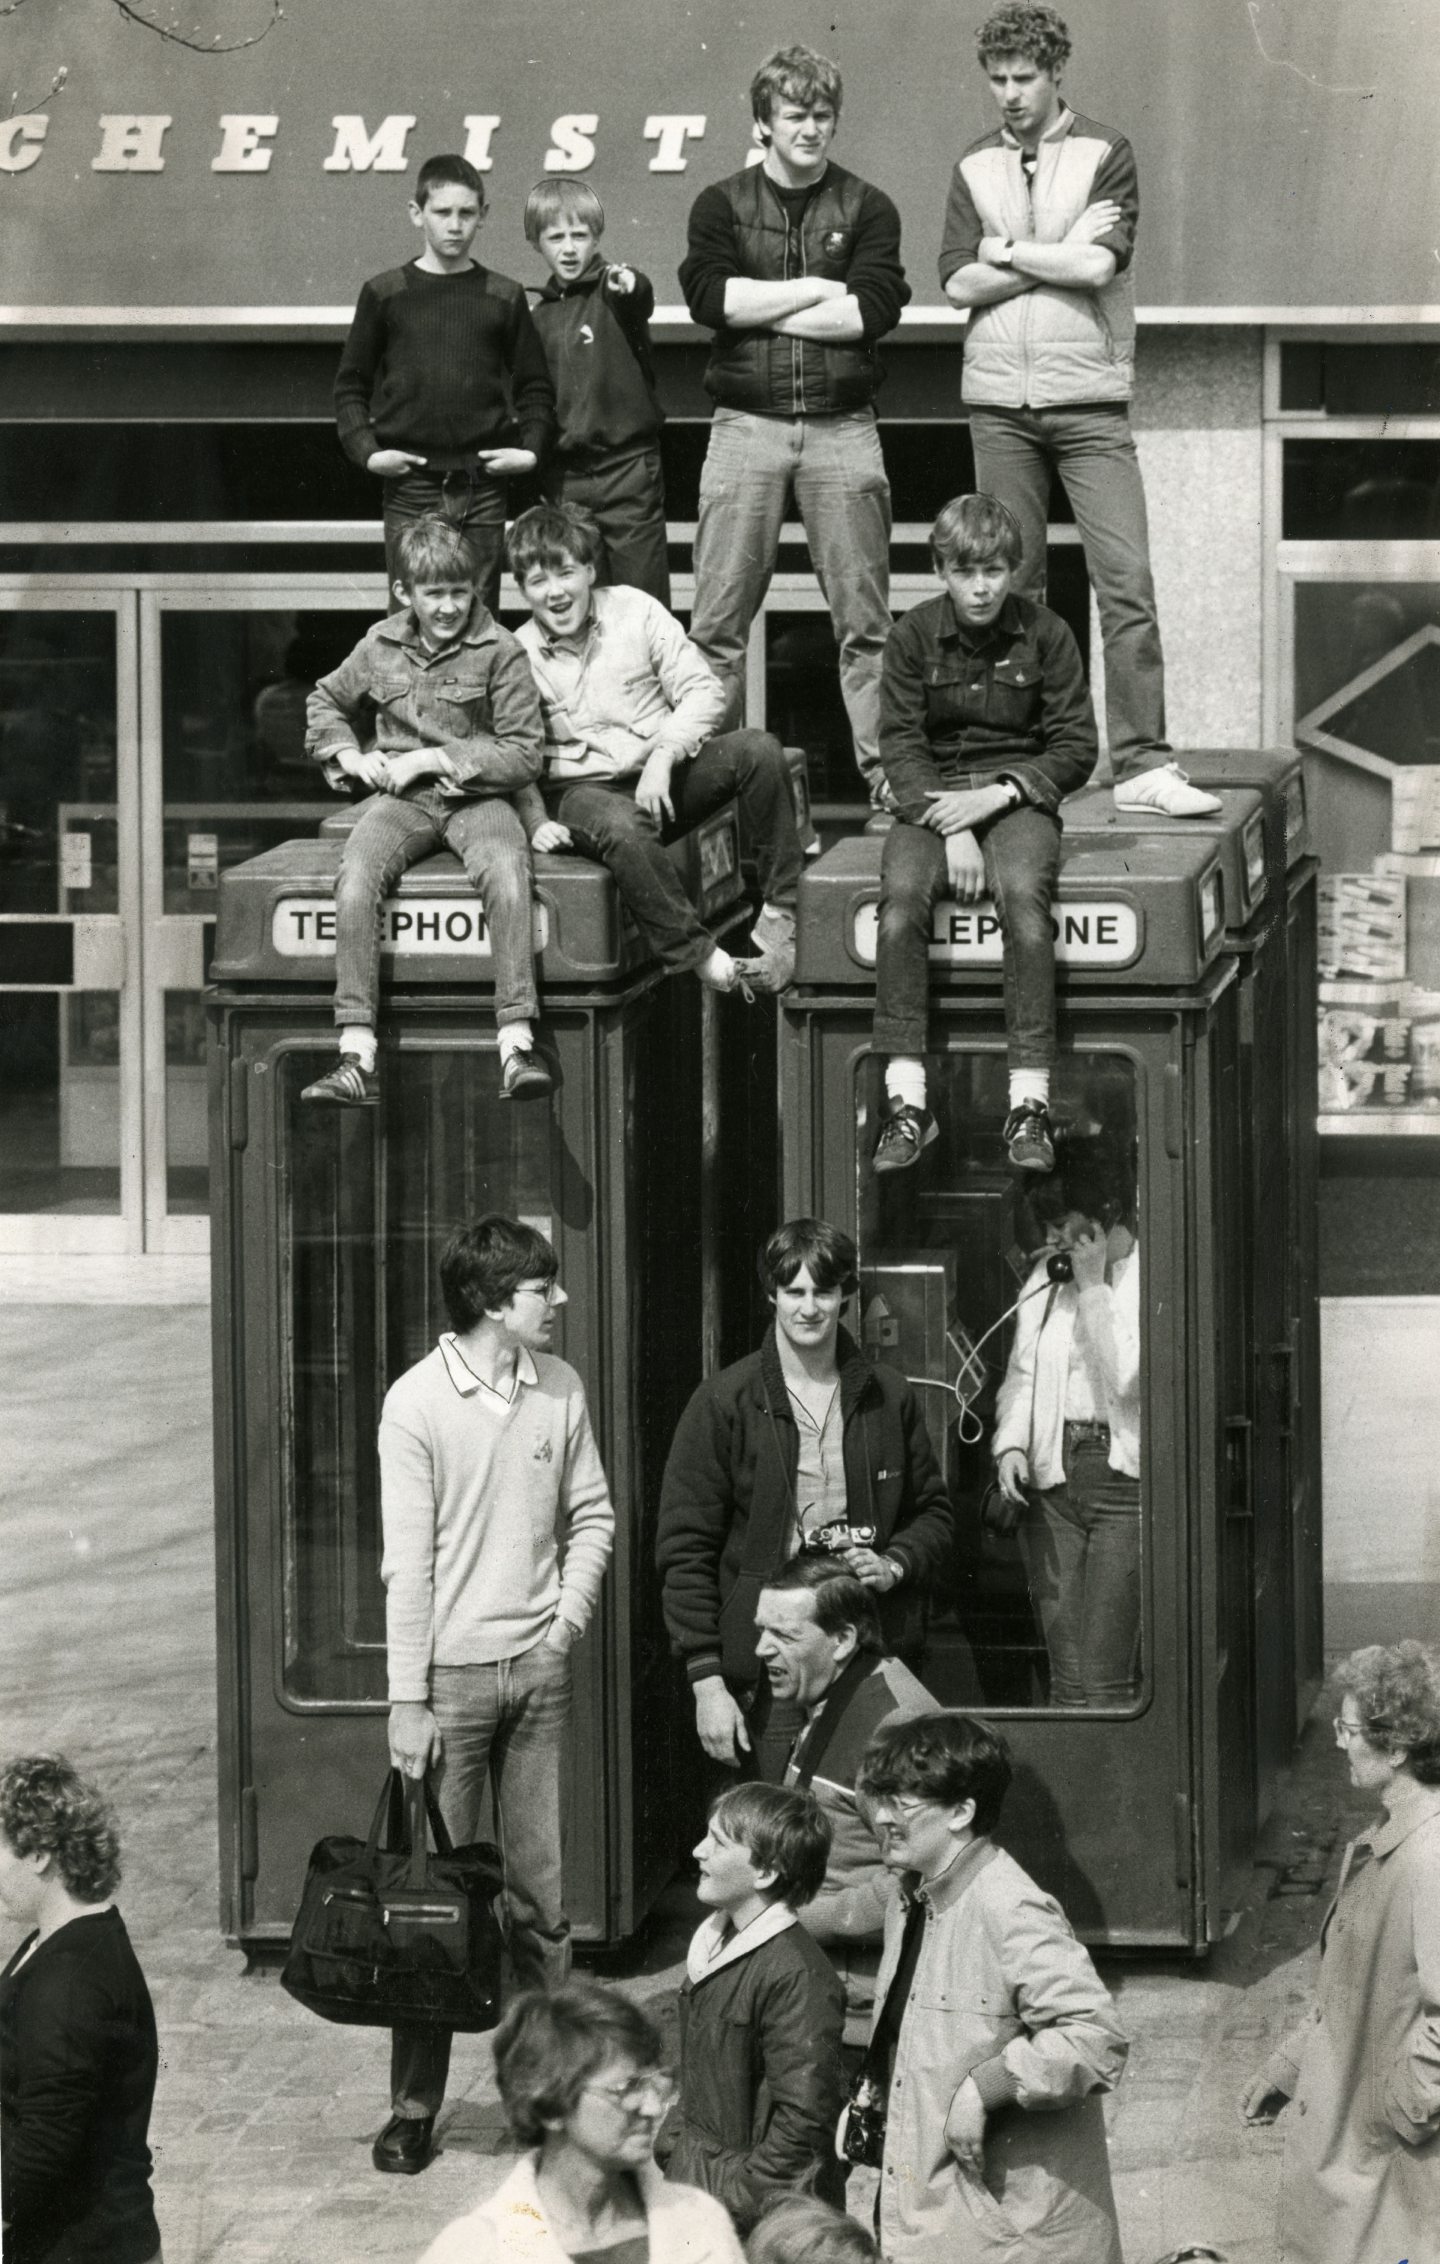 Telephone kiosks proved a popular vantage point for those watching the 1984 Dundee marathon